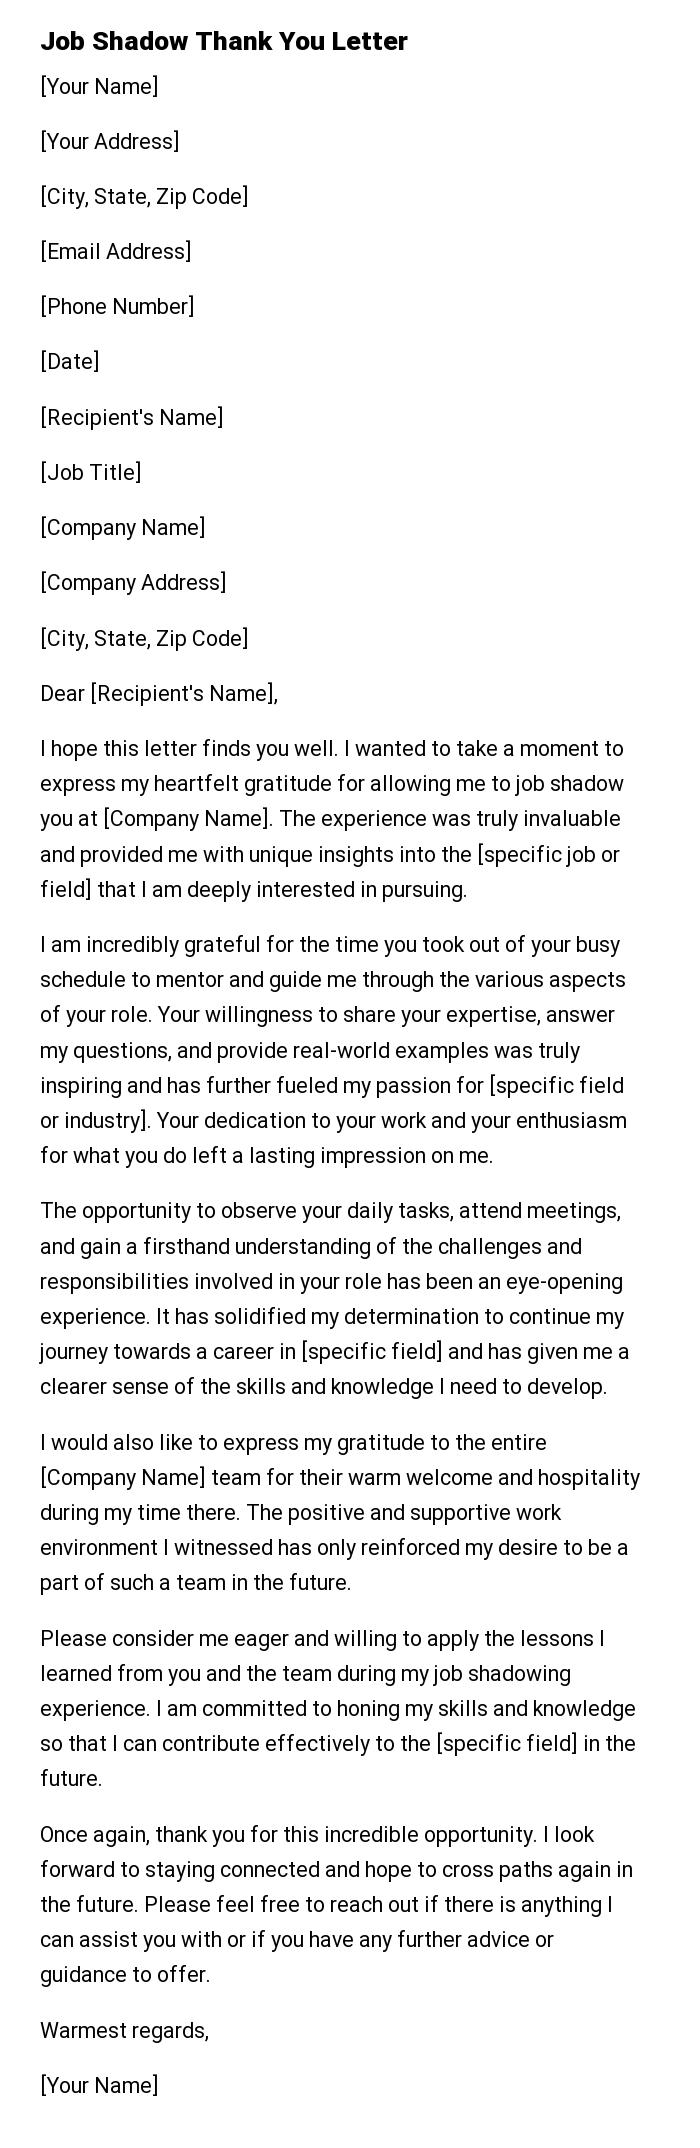 Job Shadow Thank You Letter